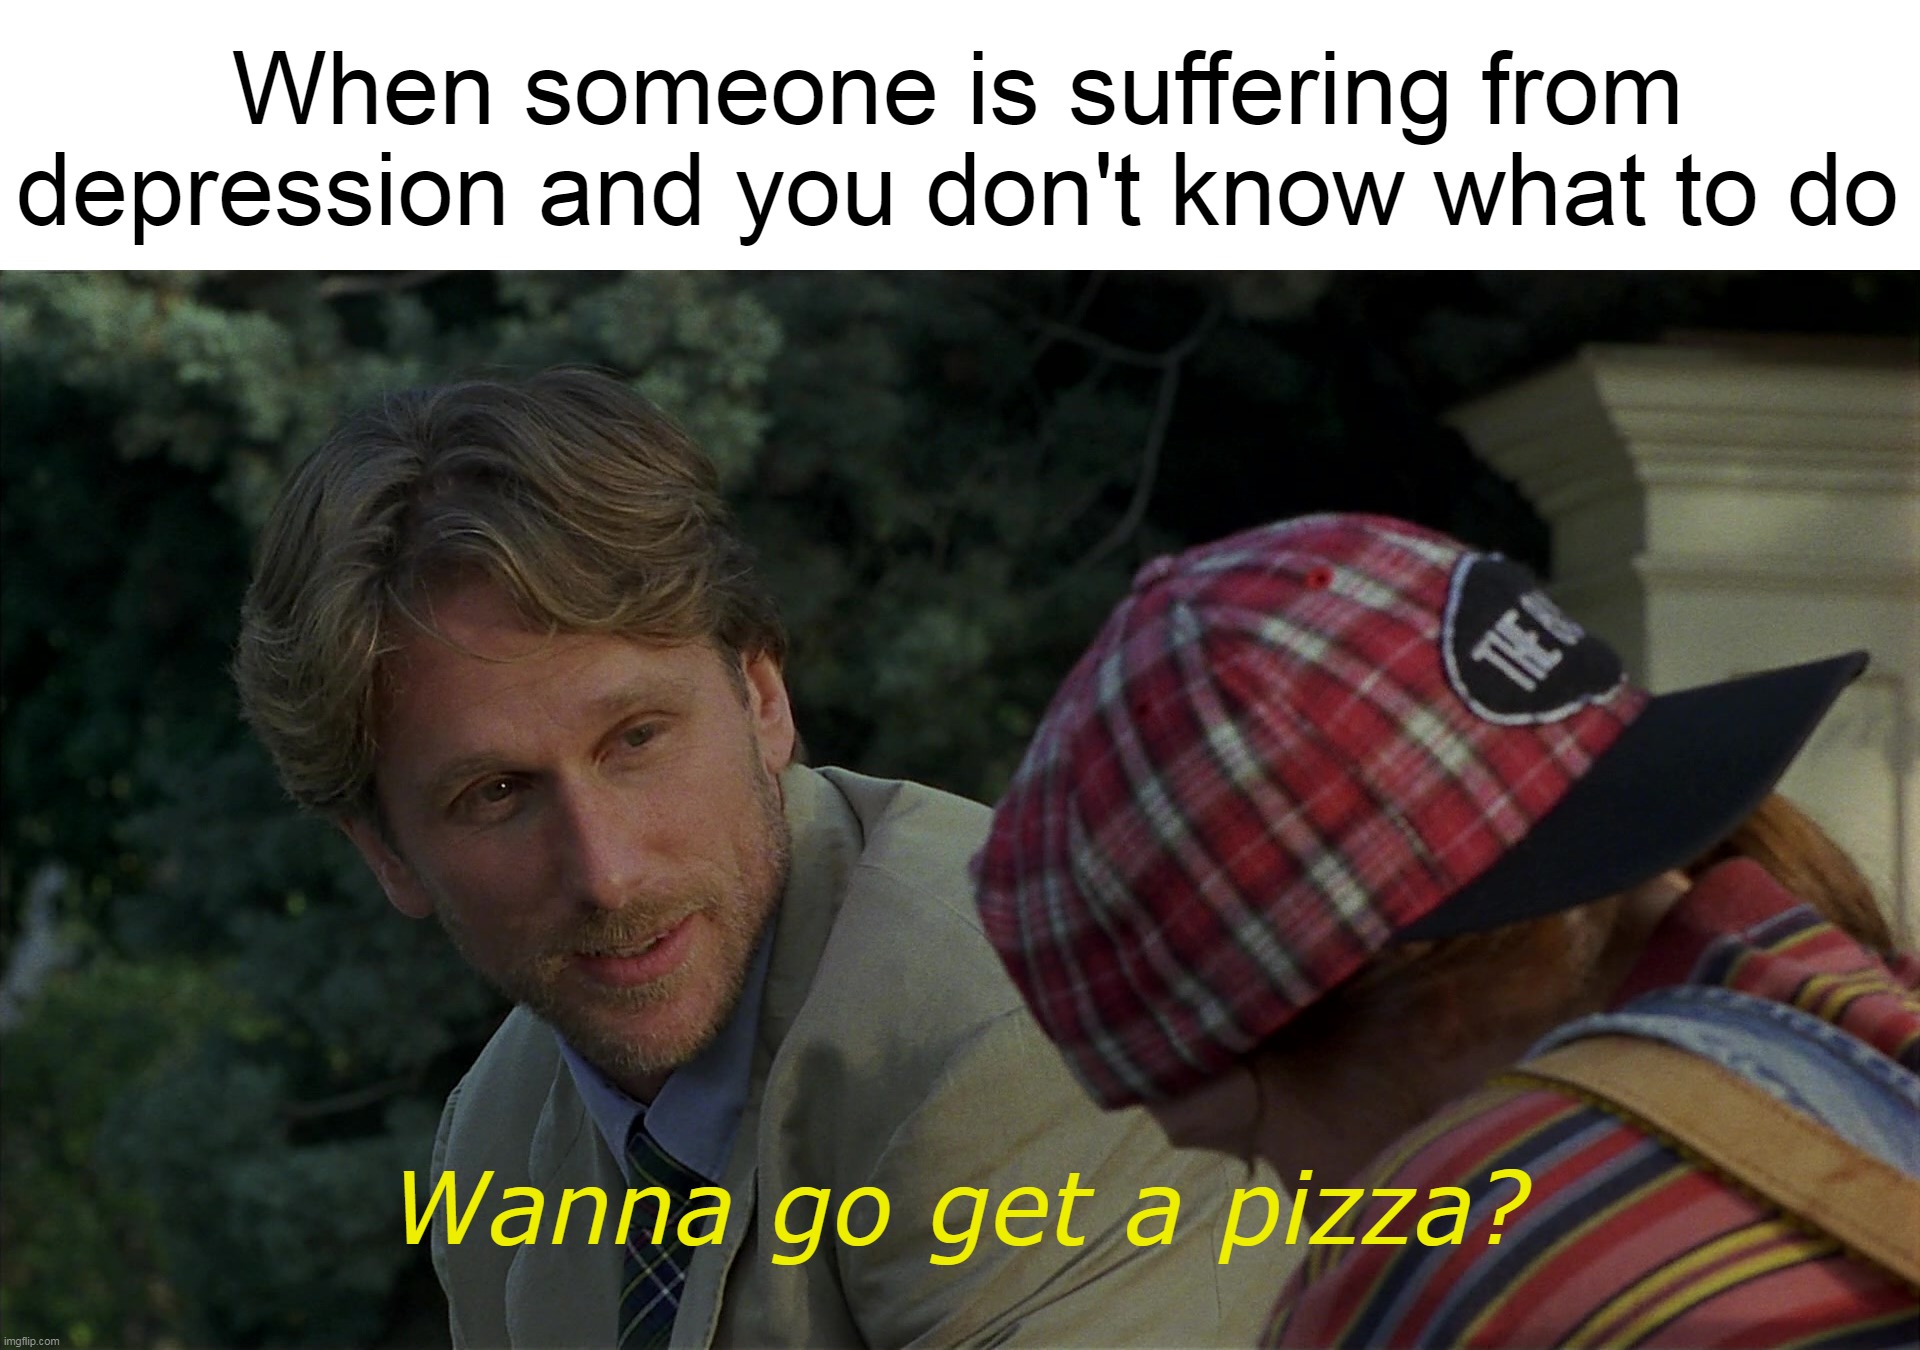 When someone is suffering from depression and you don't know what to do; Wanna go get a pizza? | image tagged in meme,memes,humor,relatable,depression | made w/ Imgflip meme maker